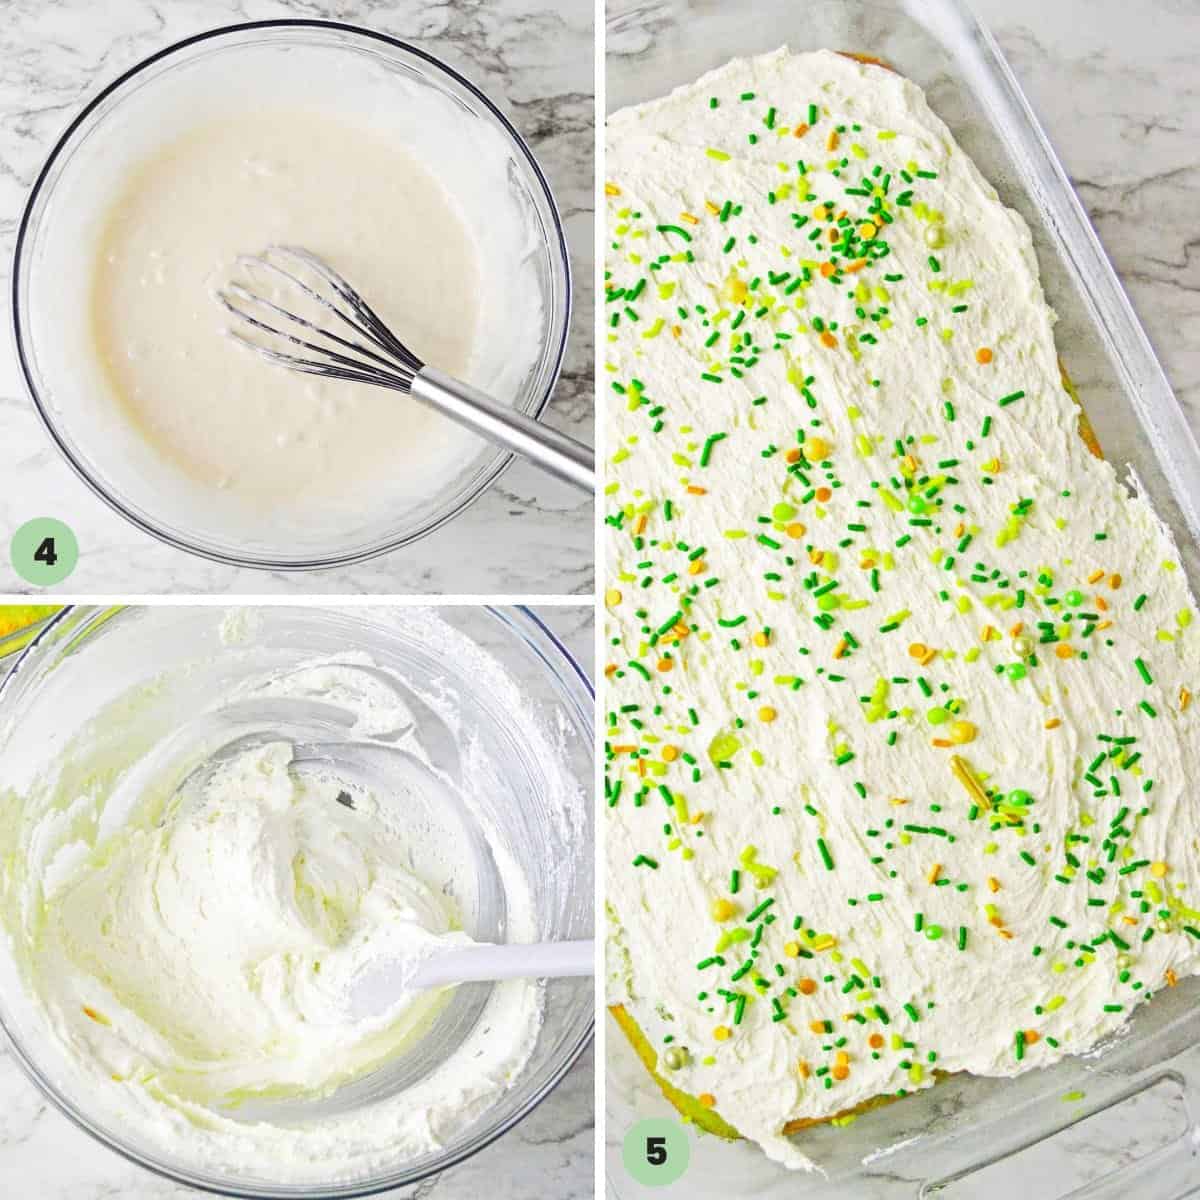 Collage of 3 images showing how to make cake frosting, and frost the cake.